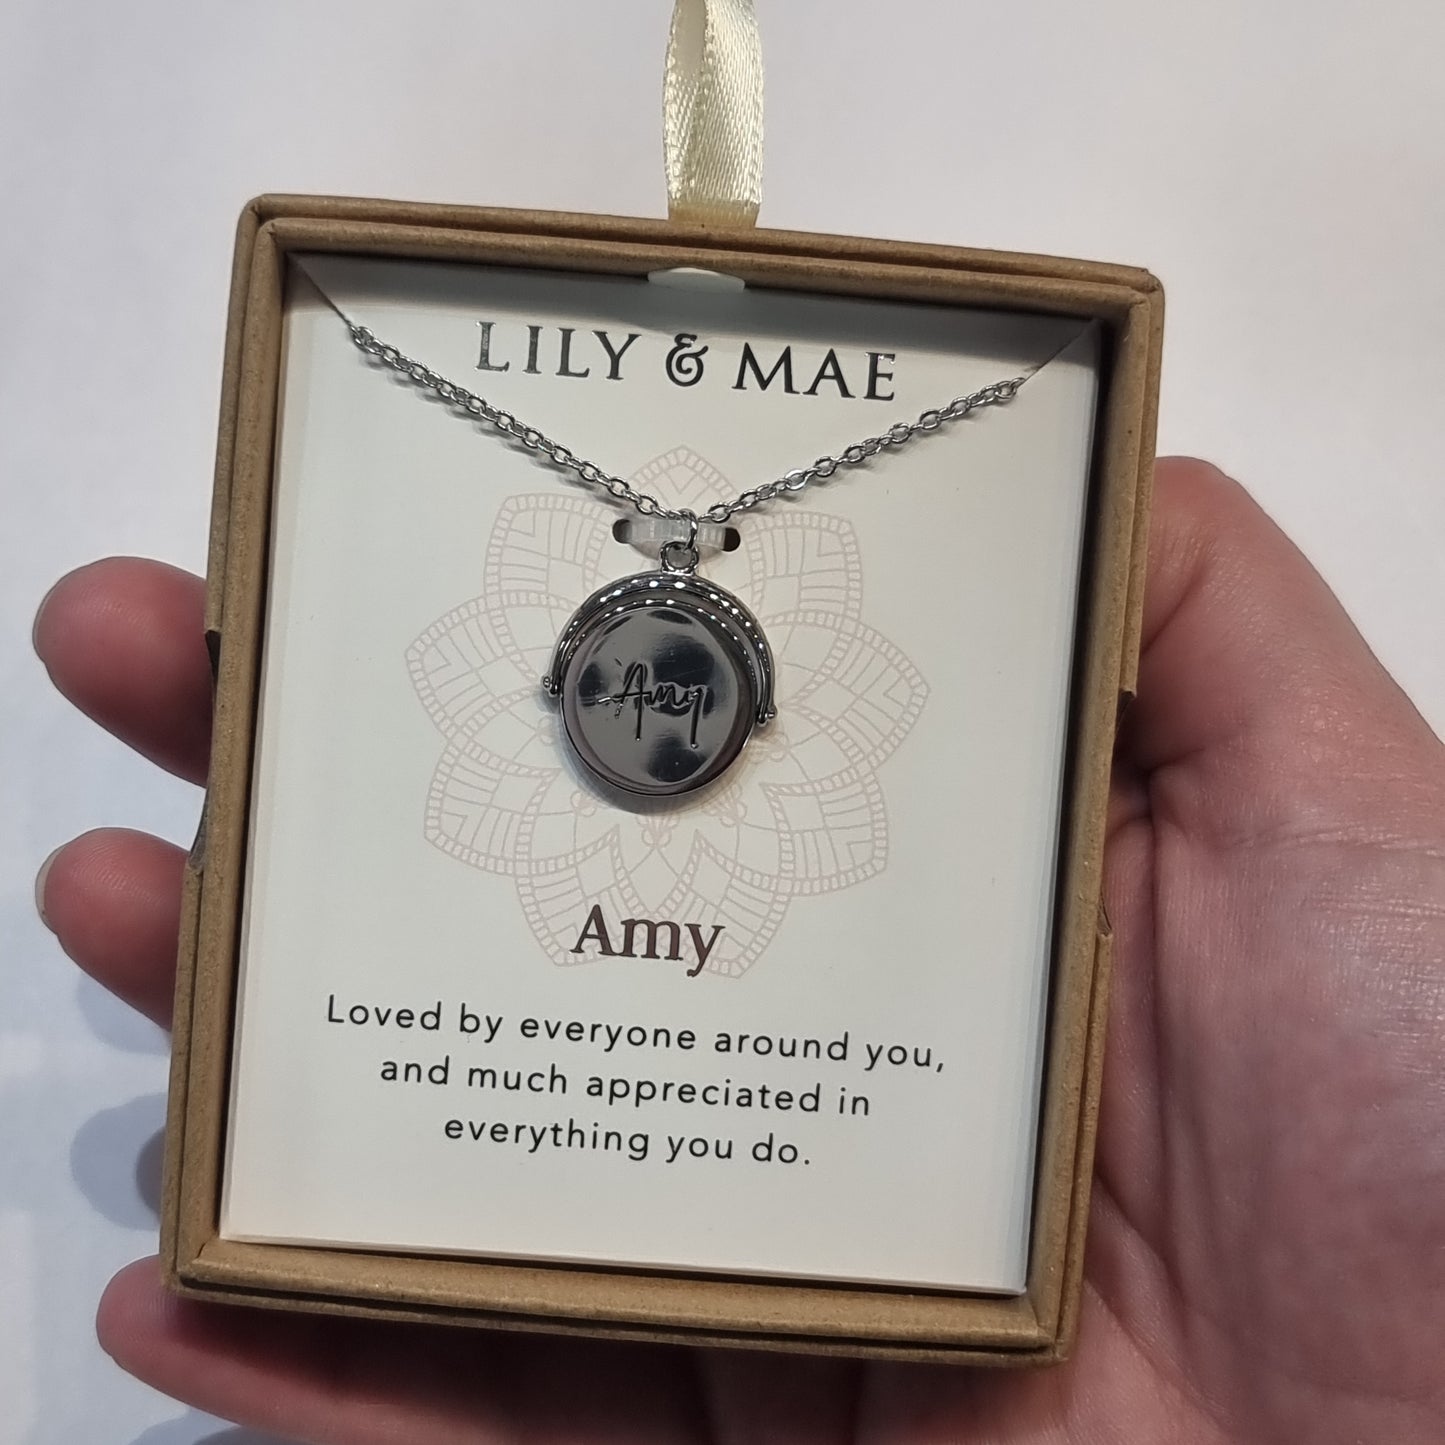 L&M spinning necklace - Amy - Rivendell Shop